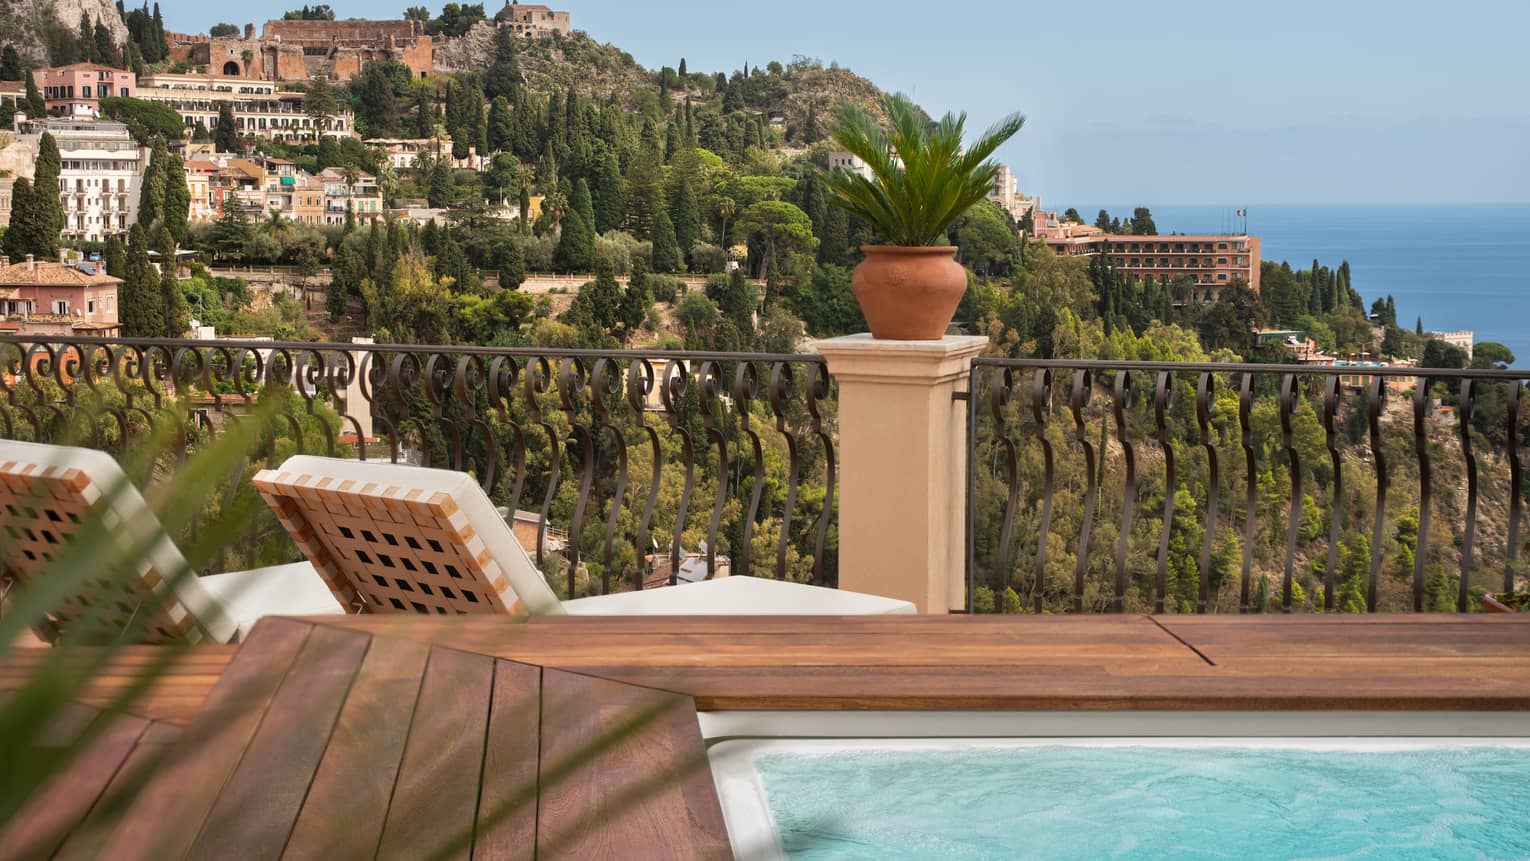 Terrace with hot tub, two lounge chairs, overlooking southern Italian coast